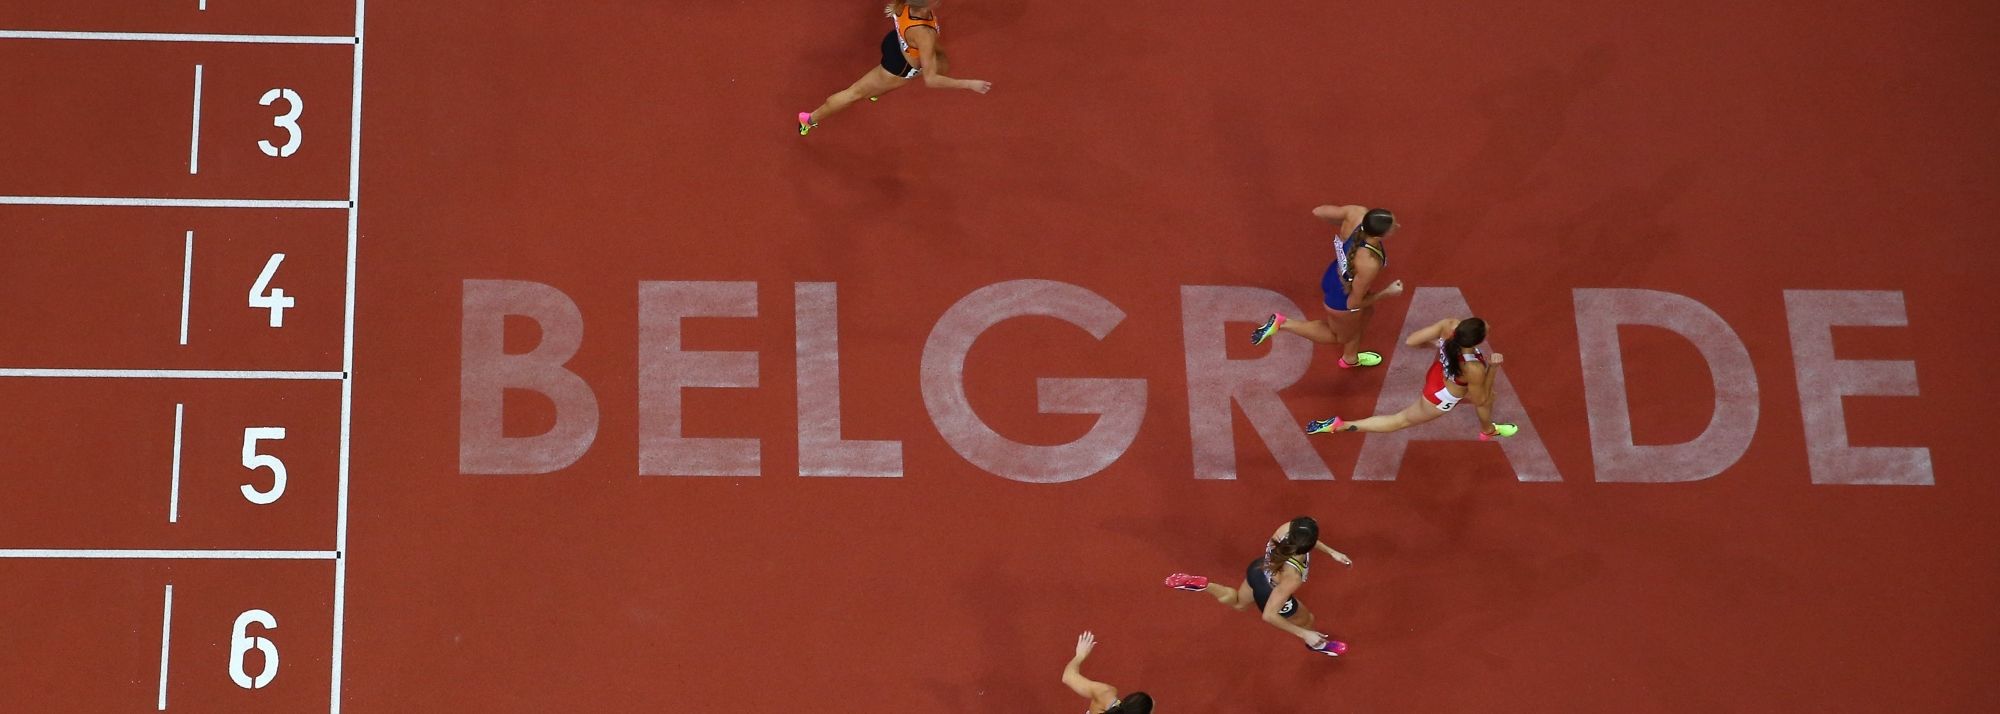 The world's greatest athletes will meet in Belgrade in March 2022.